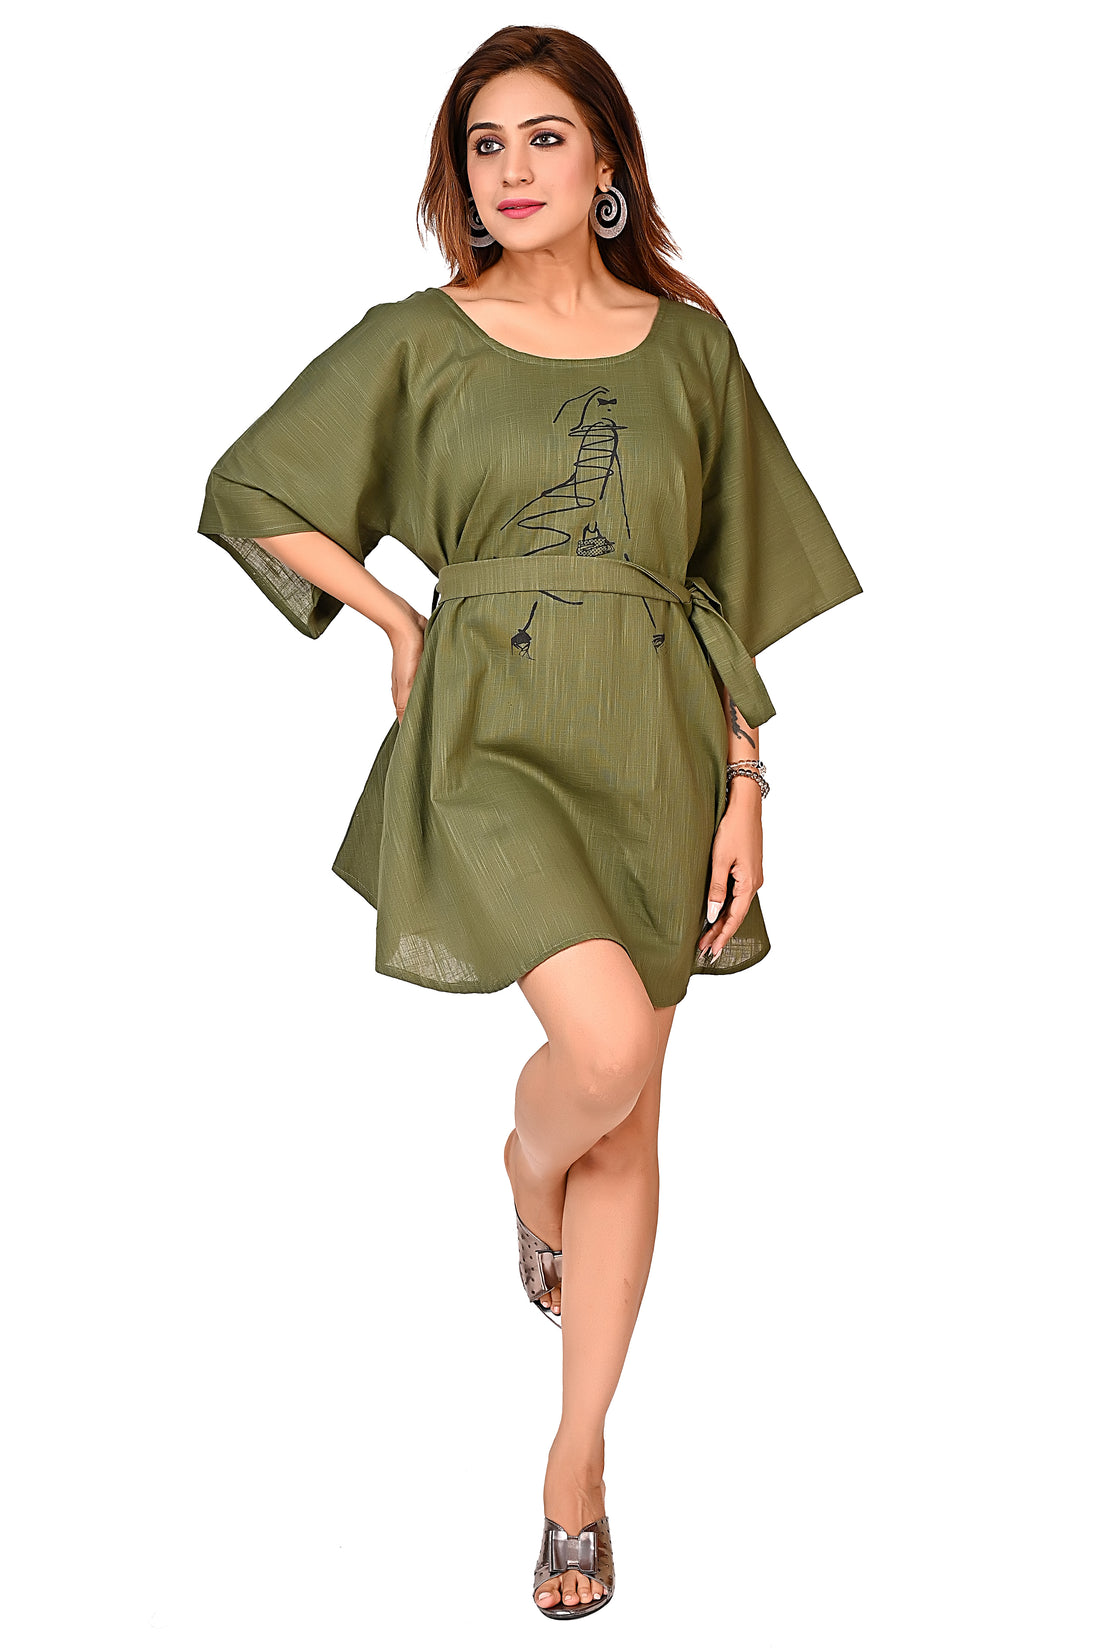 Nirmal online Premium Cotton Top for Women in Olive Geen Colour